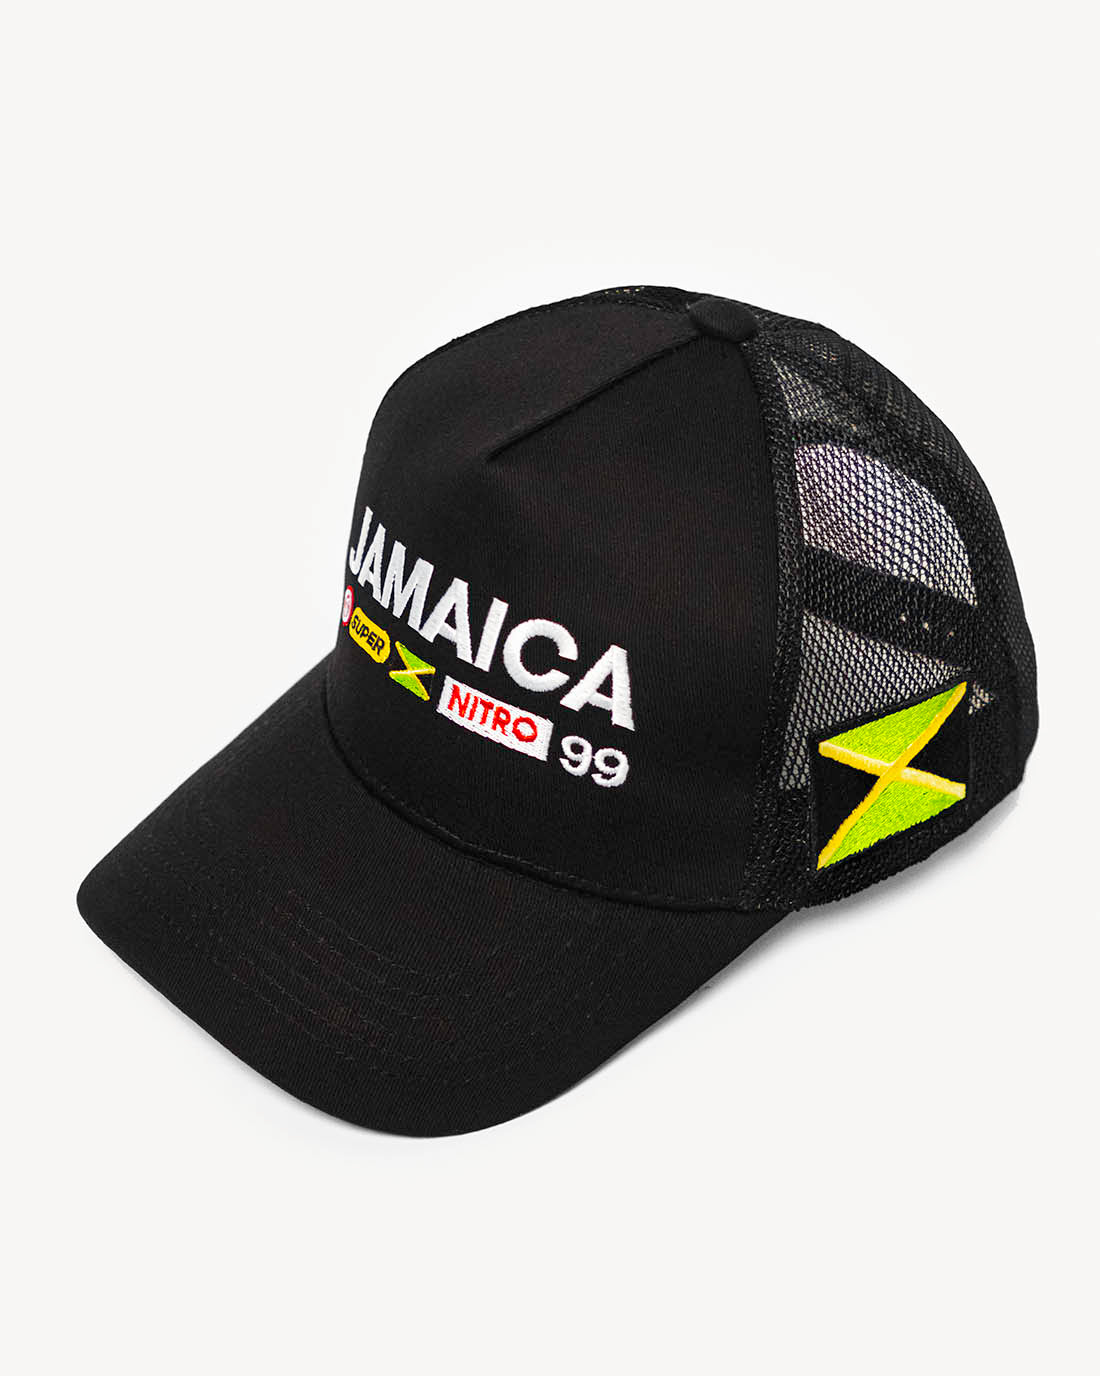 Front view of a sleek black snapback hat with stylish Jamaica-inspired embroidered design, patches and cooling mesh back.